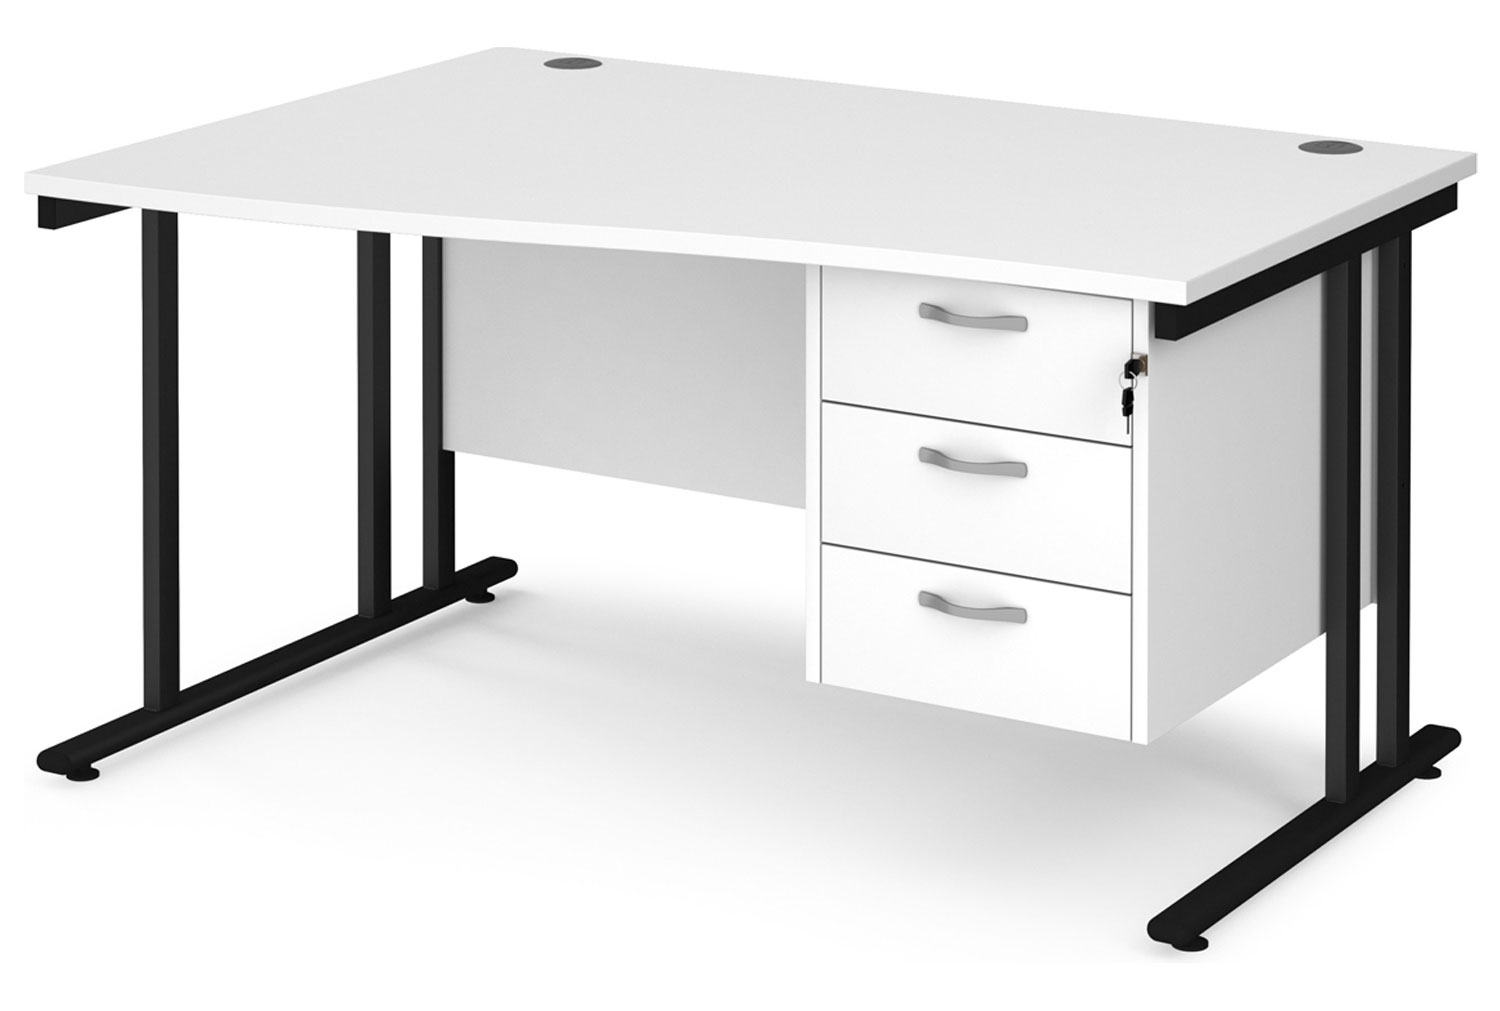 Value Line Deluxe C-Leg Left Hand Wave Office Desk 3 Drawers (Black Legs), 140wx99/80dx73h (cm), White, Express Delivery